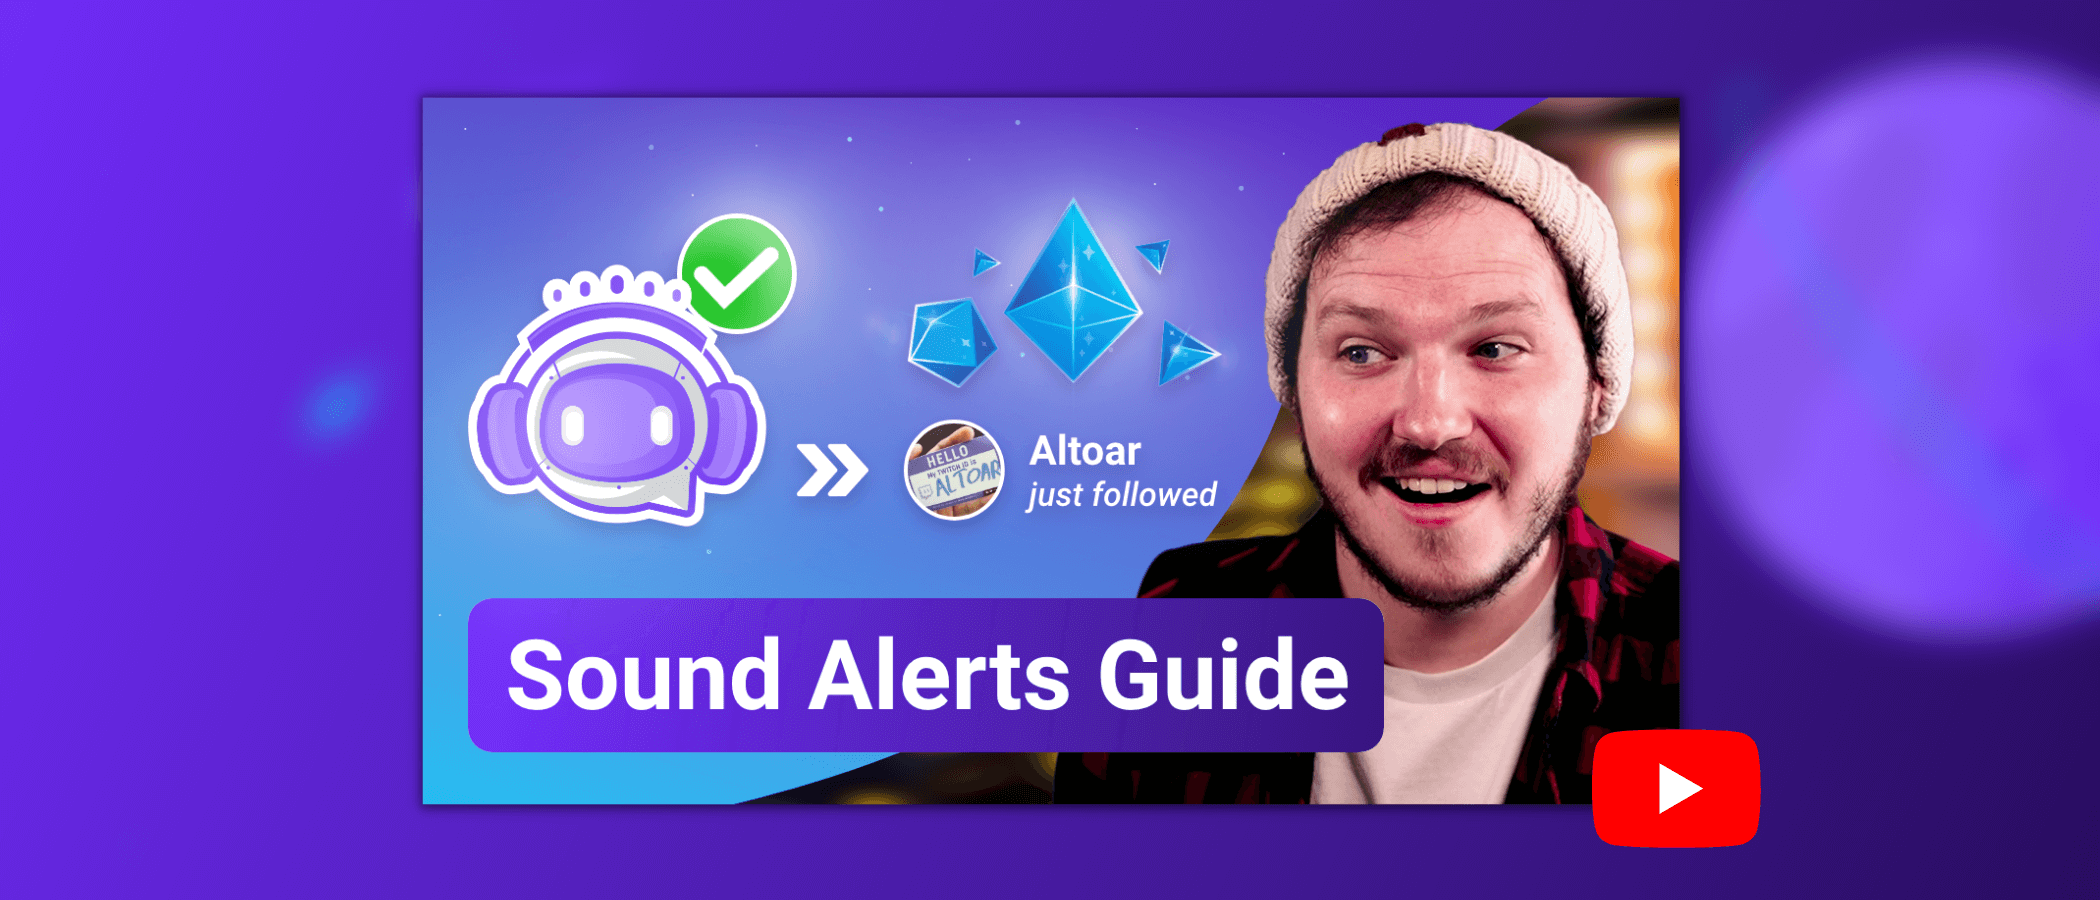 This image shows the thumbnail of the Sound Alerts video guide on YouTube.